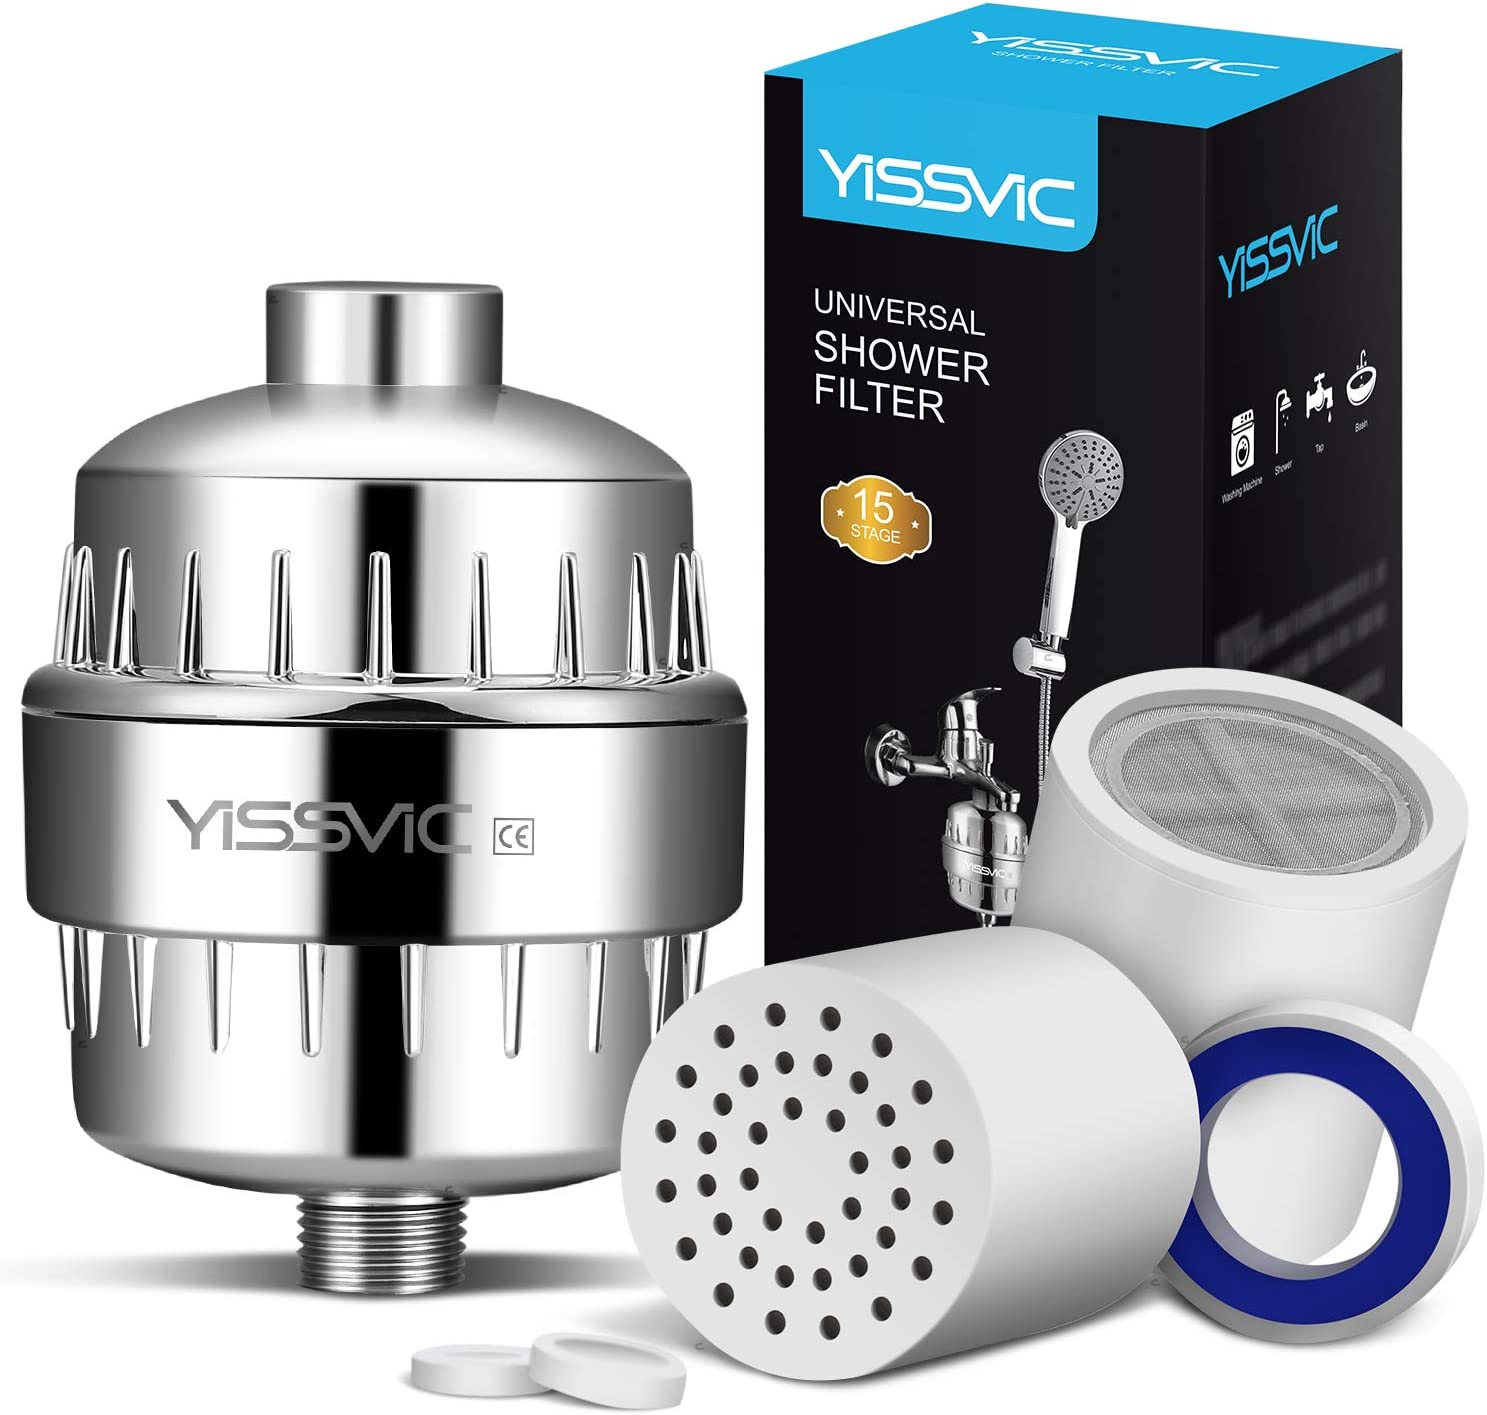 YISSVIC Shower Filter Showerhead Filter 15-Stage Shower Water Filter with 2 Replaceable Cartridges Remove Chlorine Heavy Metal Suitable for Any Shower Head 